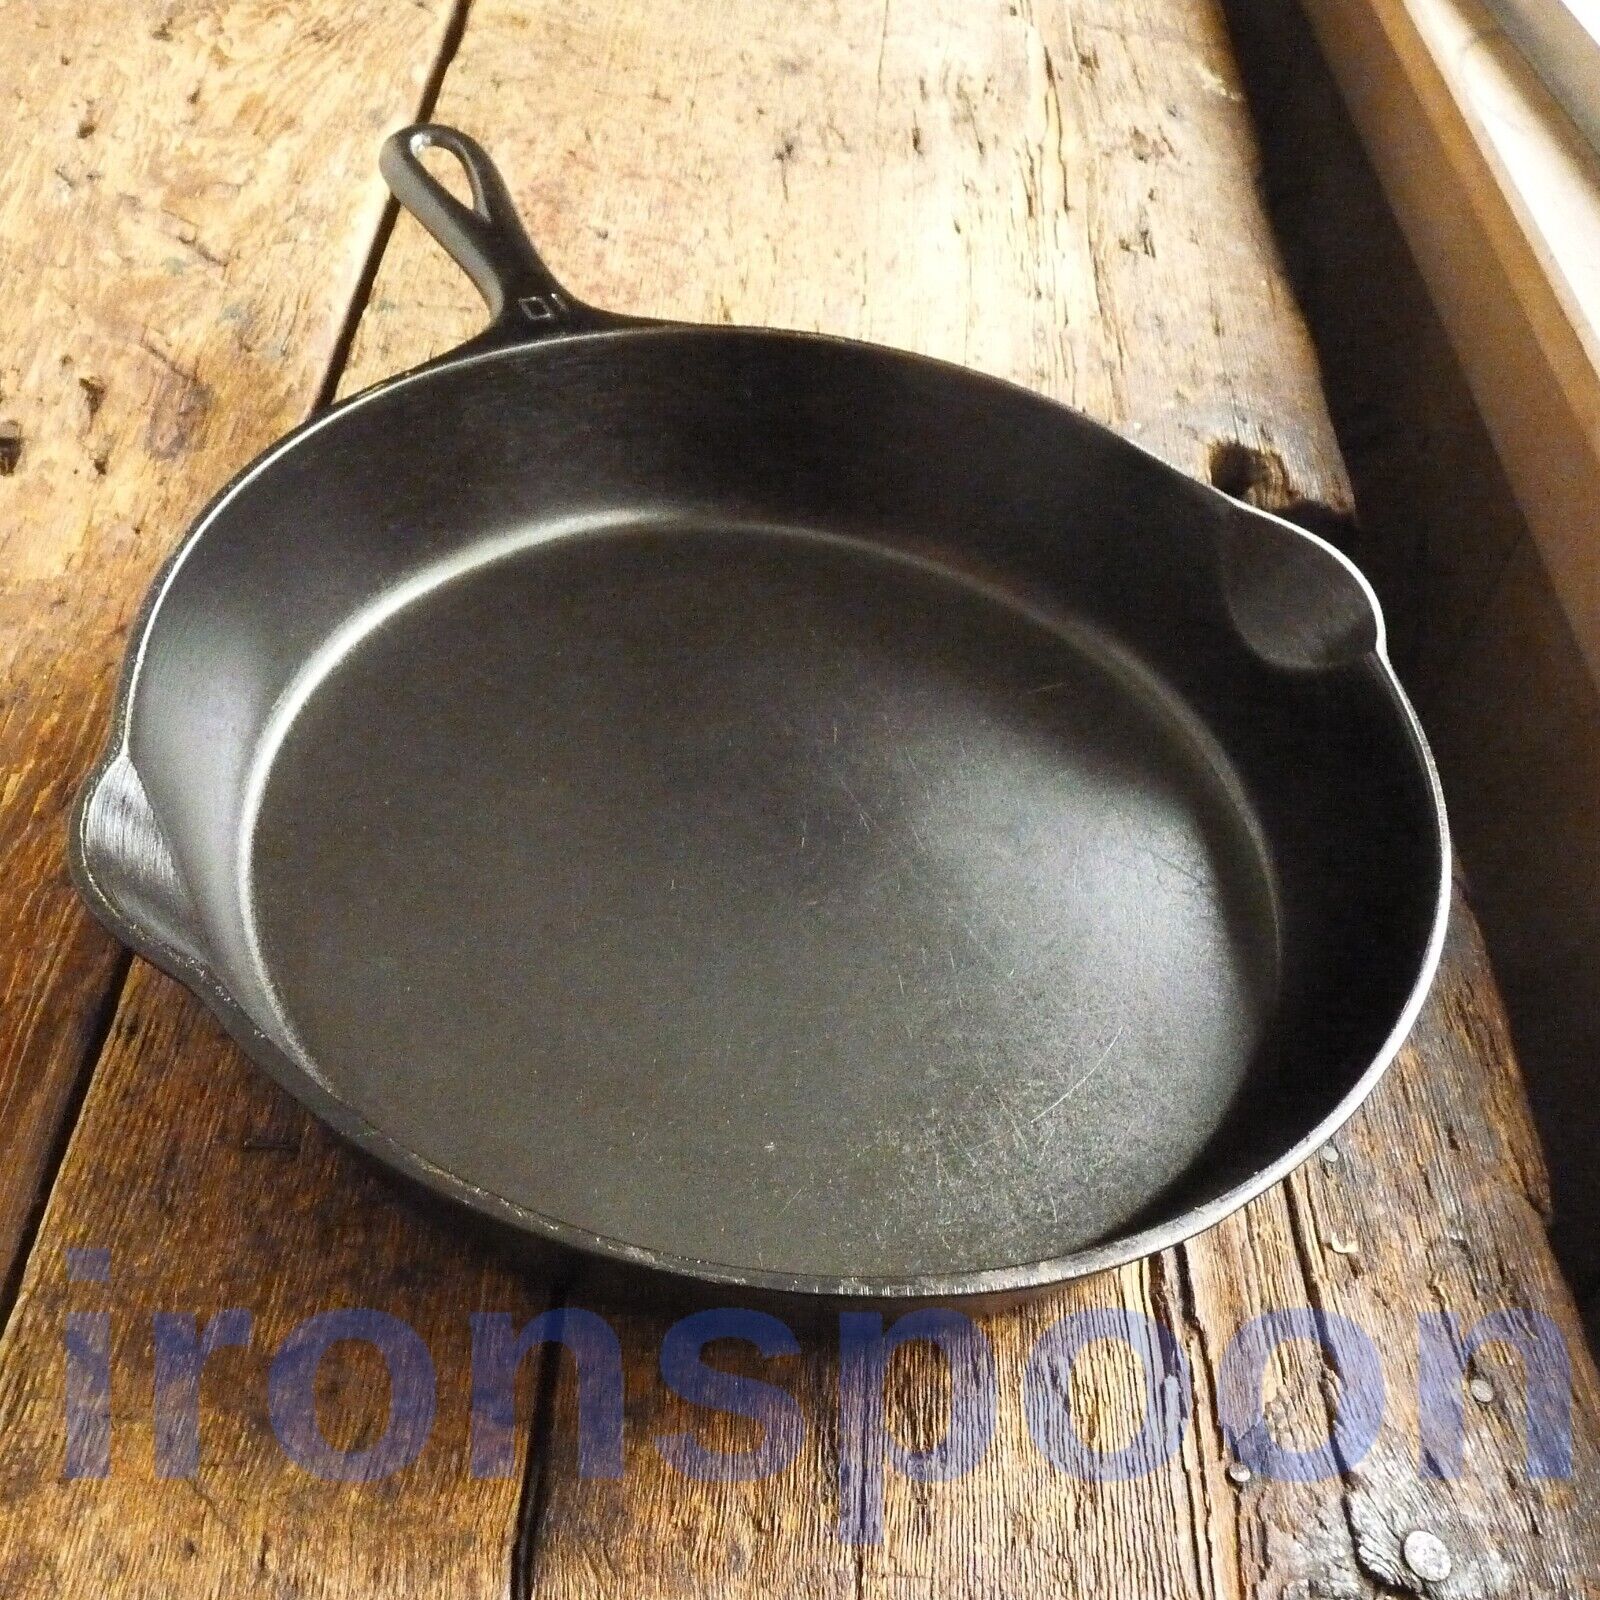 Vintage GRISWOLD Cast Iron SKILLET Frying Pan # 10 SMALL BLOCK LOGO - Ironspoon